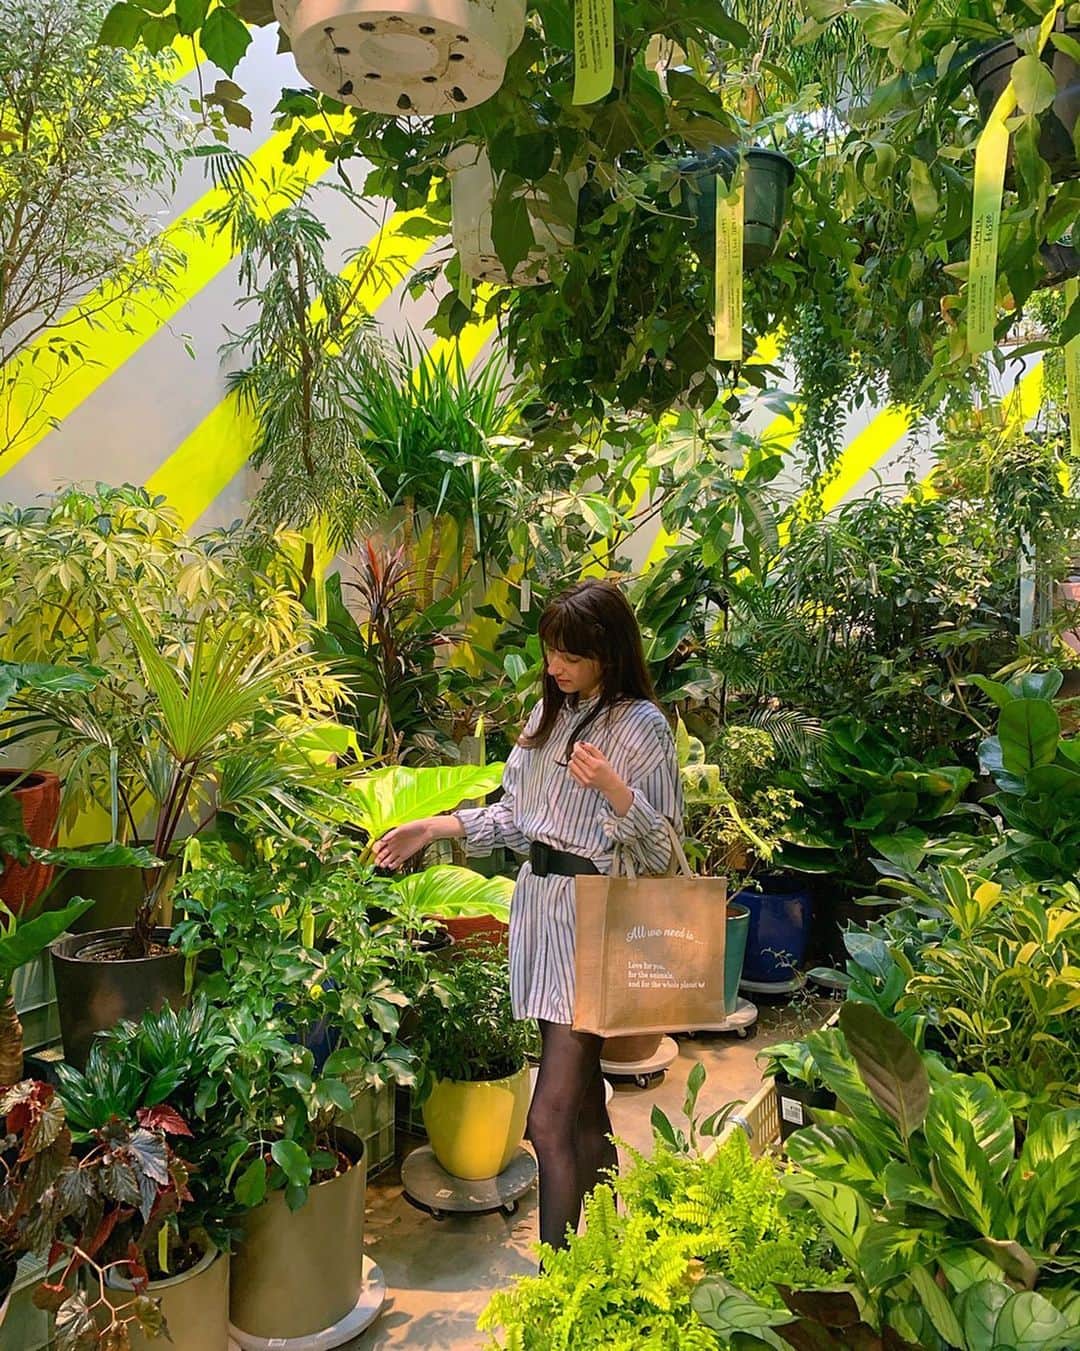 LINA（吉村リナ）のインスタグラム：「One of my dream is to have all these beautiful plants in my room, so that even I work from home, I can feel the forest vibes all the time 🌳🕊🪴 🌼💻✨  ーーーーーー  いつかMy Homeを建てたら、 自分の部屋を植物でいっぱいにするのが夢です🪴そうしたら、たとえお家から仕事をしていても、ずーっと森の中にいる気分になれるから...!!☺️🌳🕊💻🌹✨  ーーーーーー  PS. バッグは＋Loveの”土に還るオリジナルエコバッグ”です🌳詳細はプロフィール欄のリンク、SHOPへ🕊」